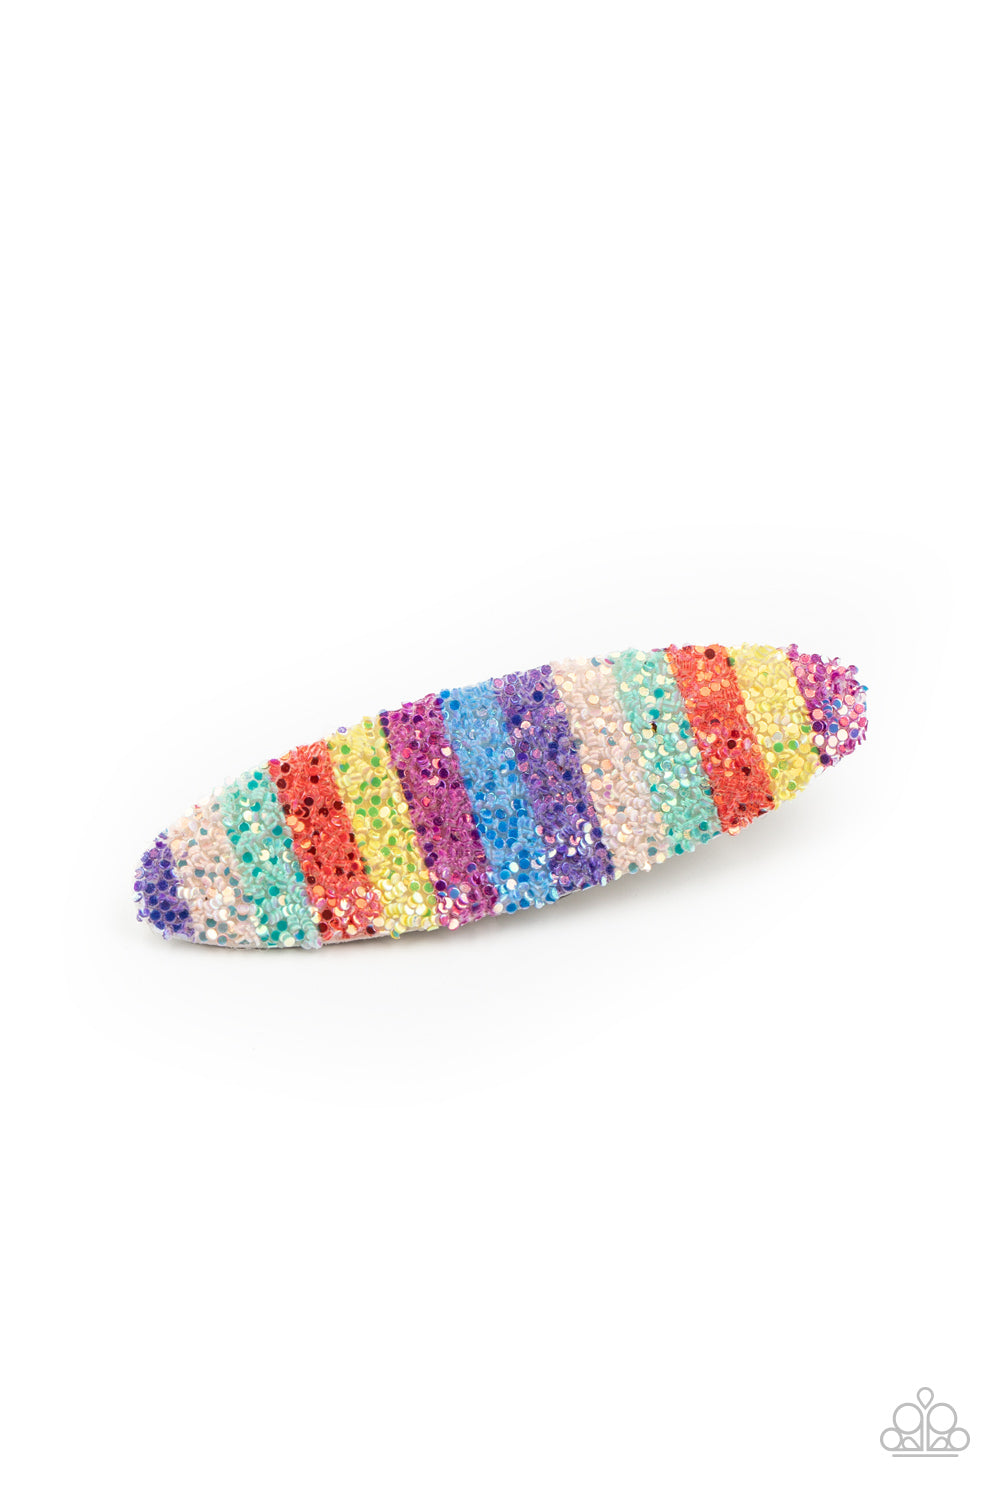 &lt;P&gt;The front of an oval frame is striped in sections of multicolored sequins, creating a colorful rainbow. Features a standard hair clip on the back. &lt;/P&gt;

&lt;P&gt;&lt;I&gt;Sold as one individual hair clip.&lt;/I&gt;&lt;/P&gt;


&lt;img src=\&quot;https://d9b54x484lq62.cloudfront.net/paparazzi/shopping/images/517_tag150x115_1.png\&quot; alt=\&quot;New Kit\&quot; align=\&quot;middle\&quot; height=\&quot;50\&quot; width=\&quot;50\&quot;/&gt;